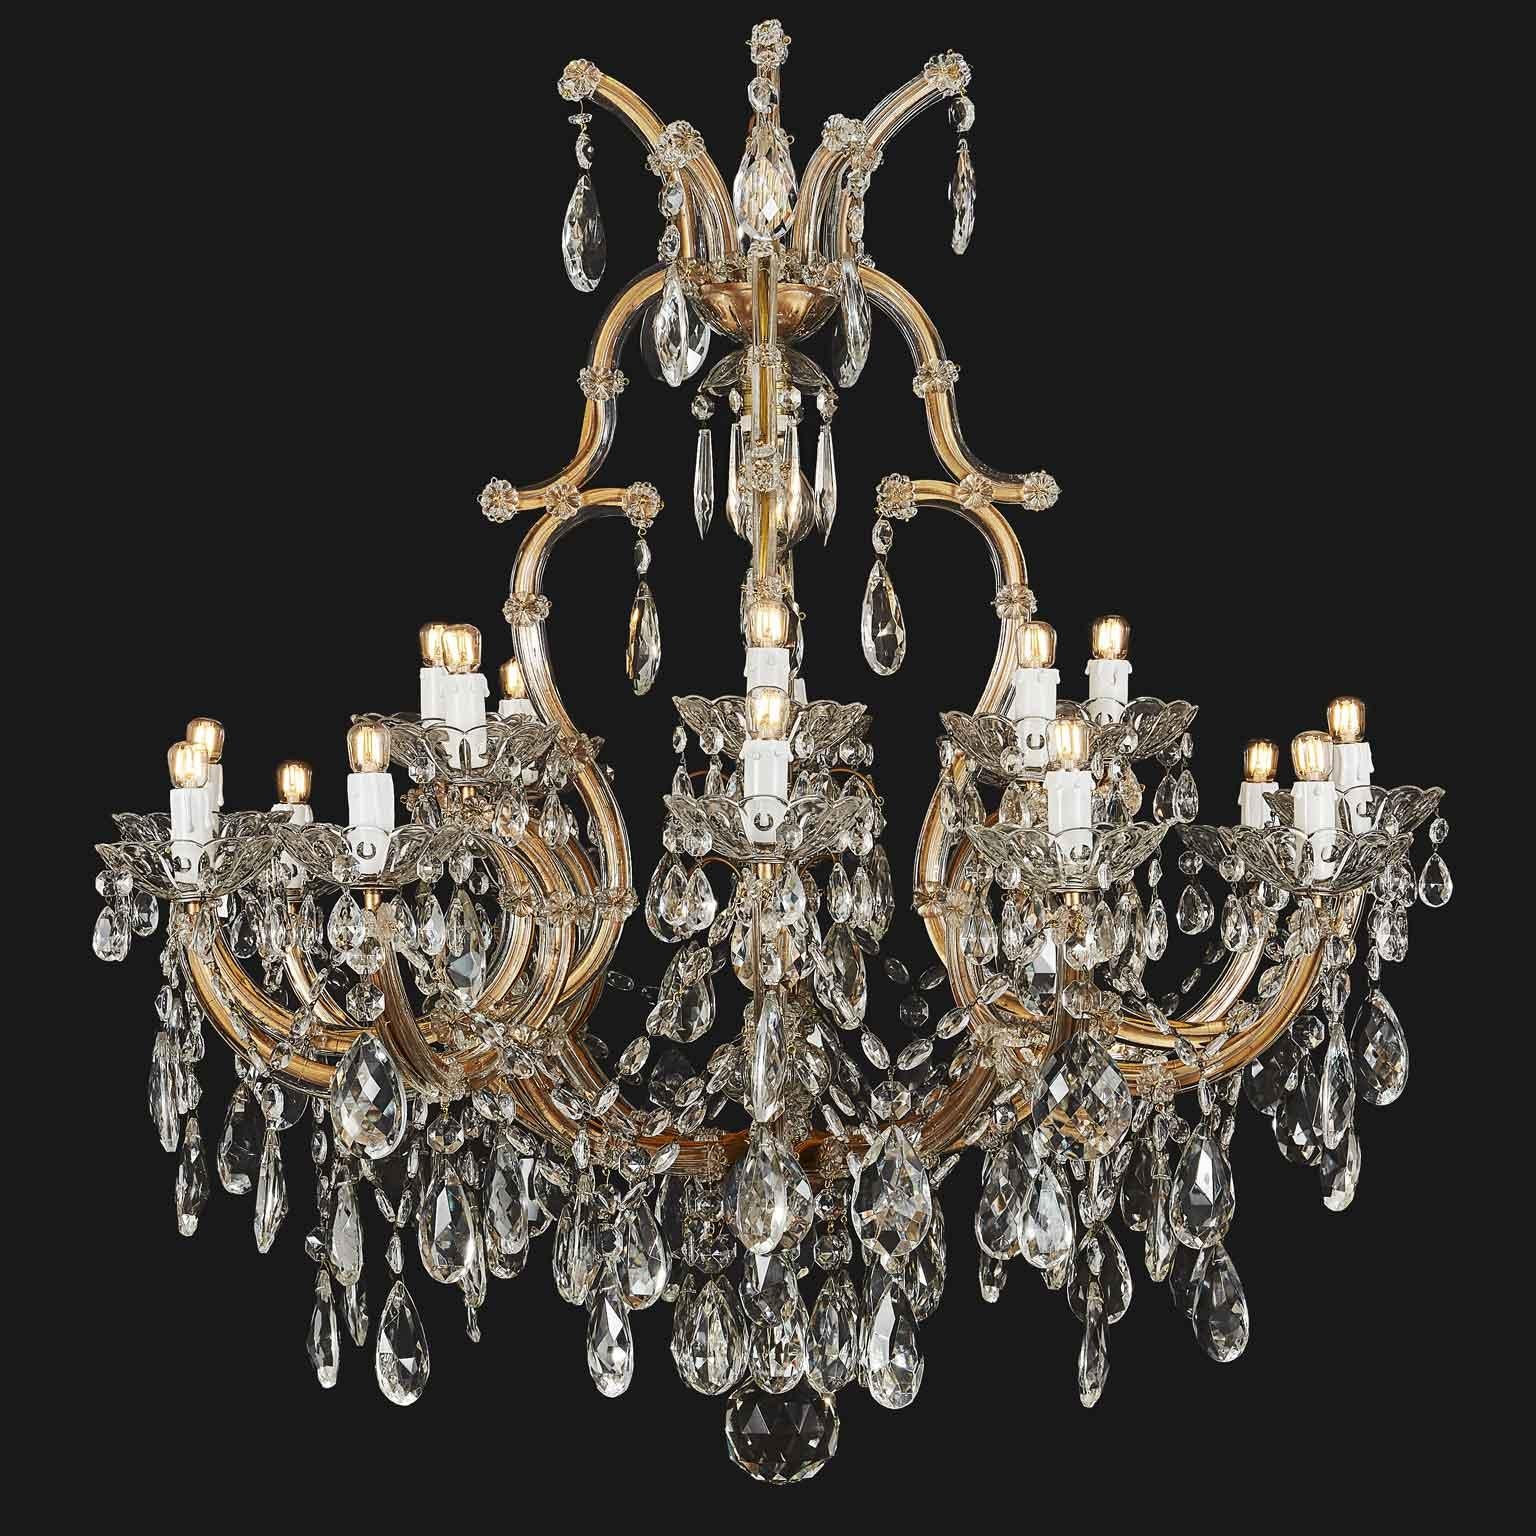 Gorgeous Italian Maria Therese style twenty one-light crystal chandelier with a tree-shaped form surmounted by beautifully contoured scrolling arms. This lovely two-tier chandelier is in good condition and comes from a private palazzo of Milano